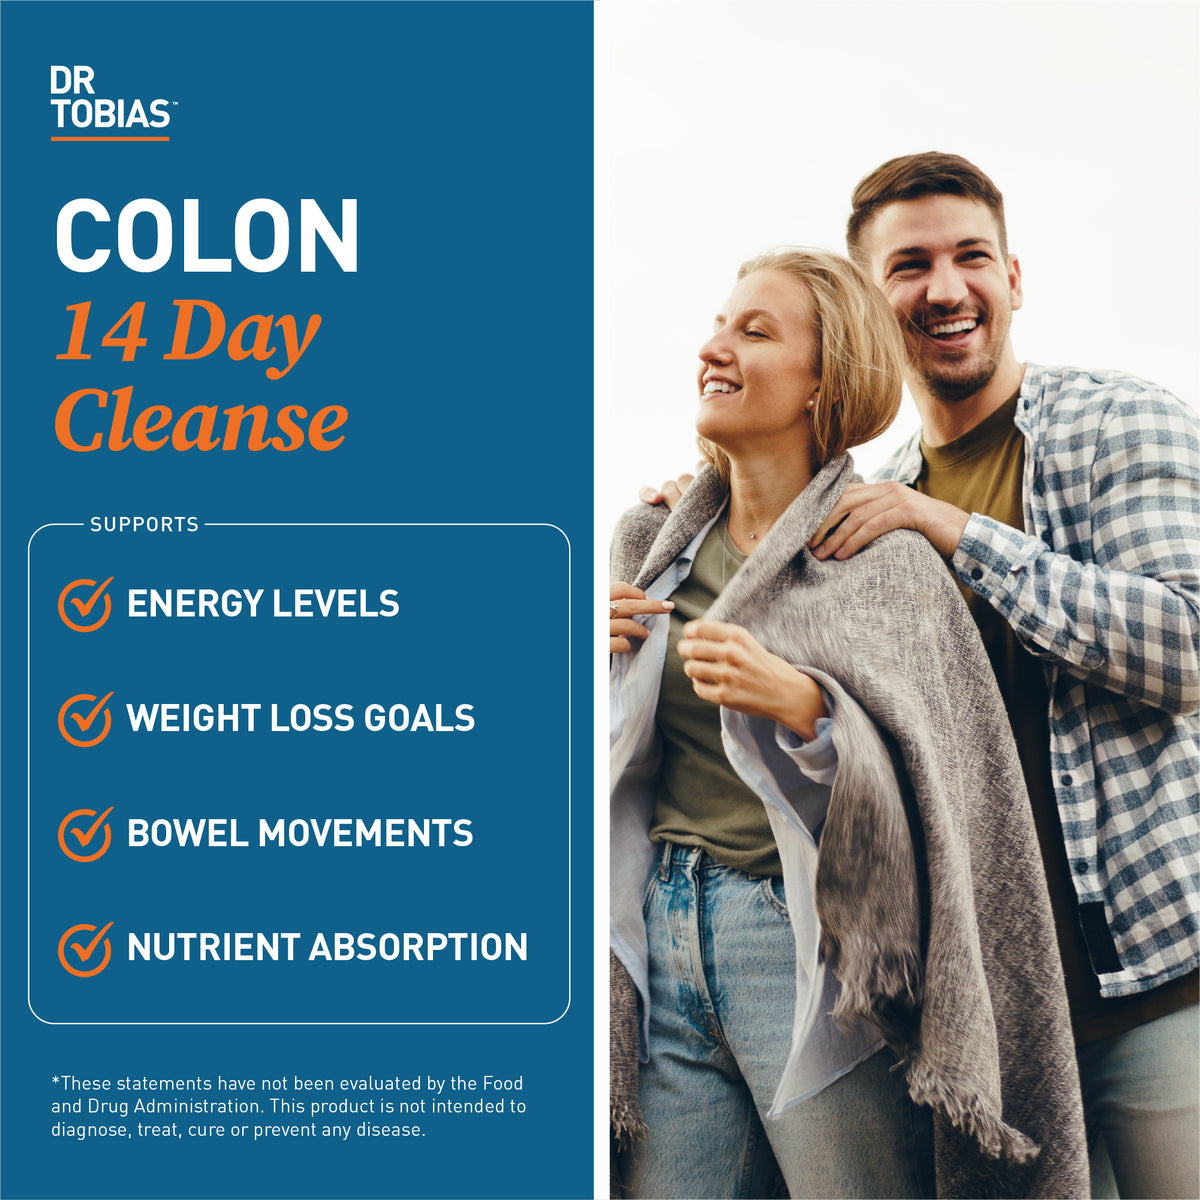 Colon 14 Day Cleanse which supports energy levels, weight loss goals, bowel movements, nutrient absorption